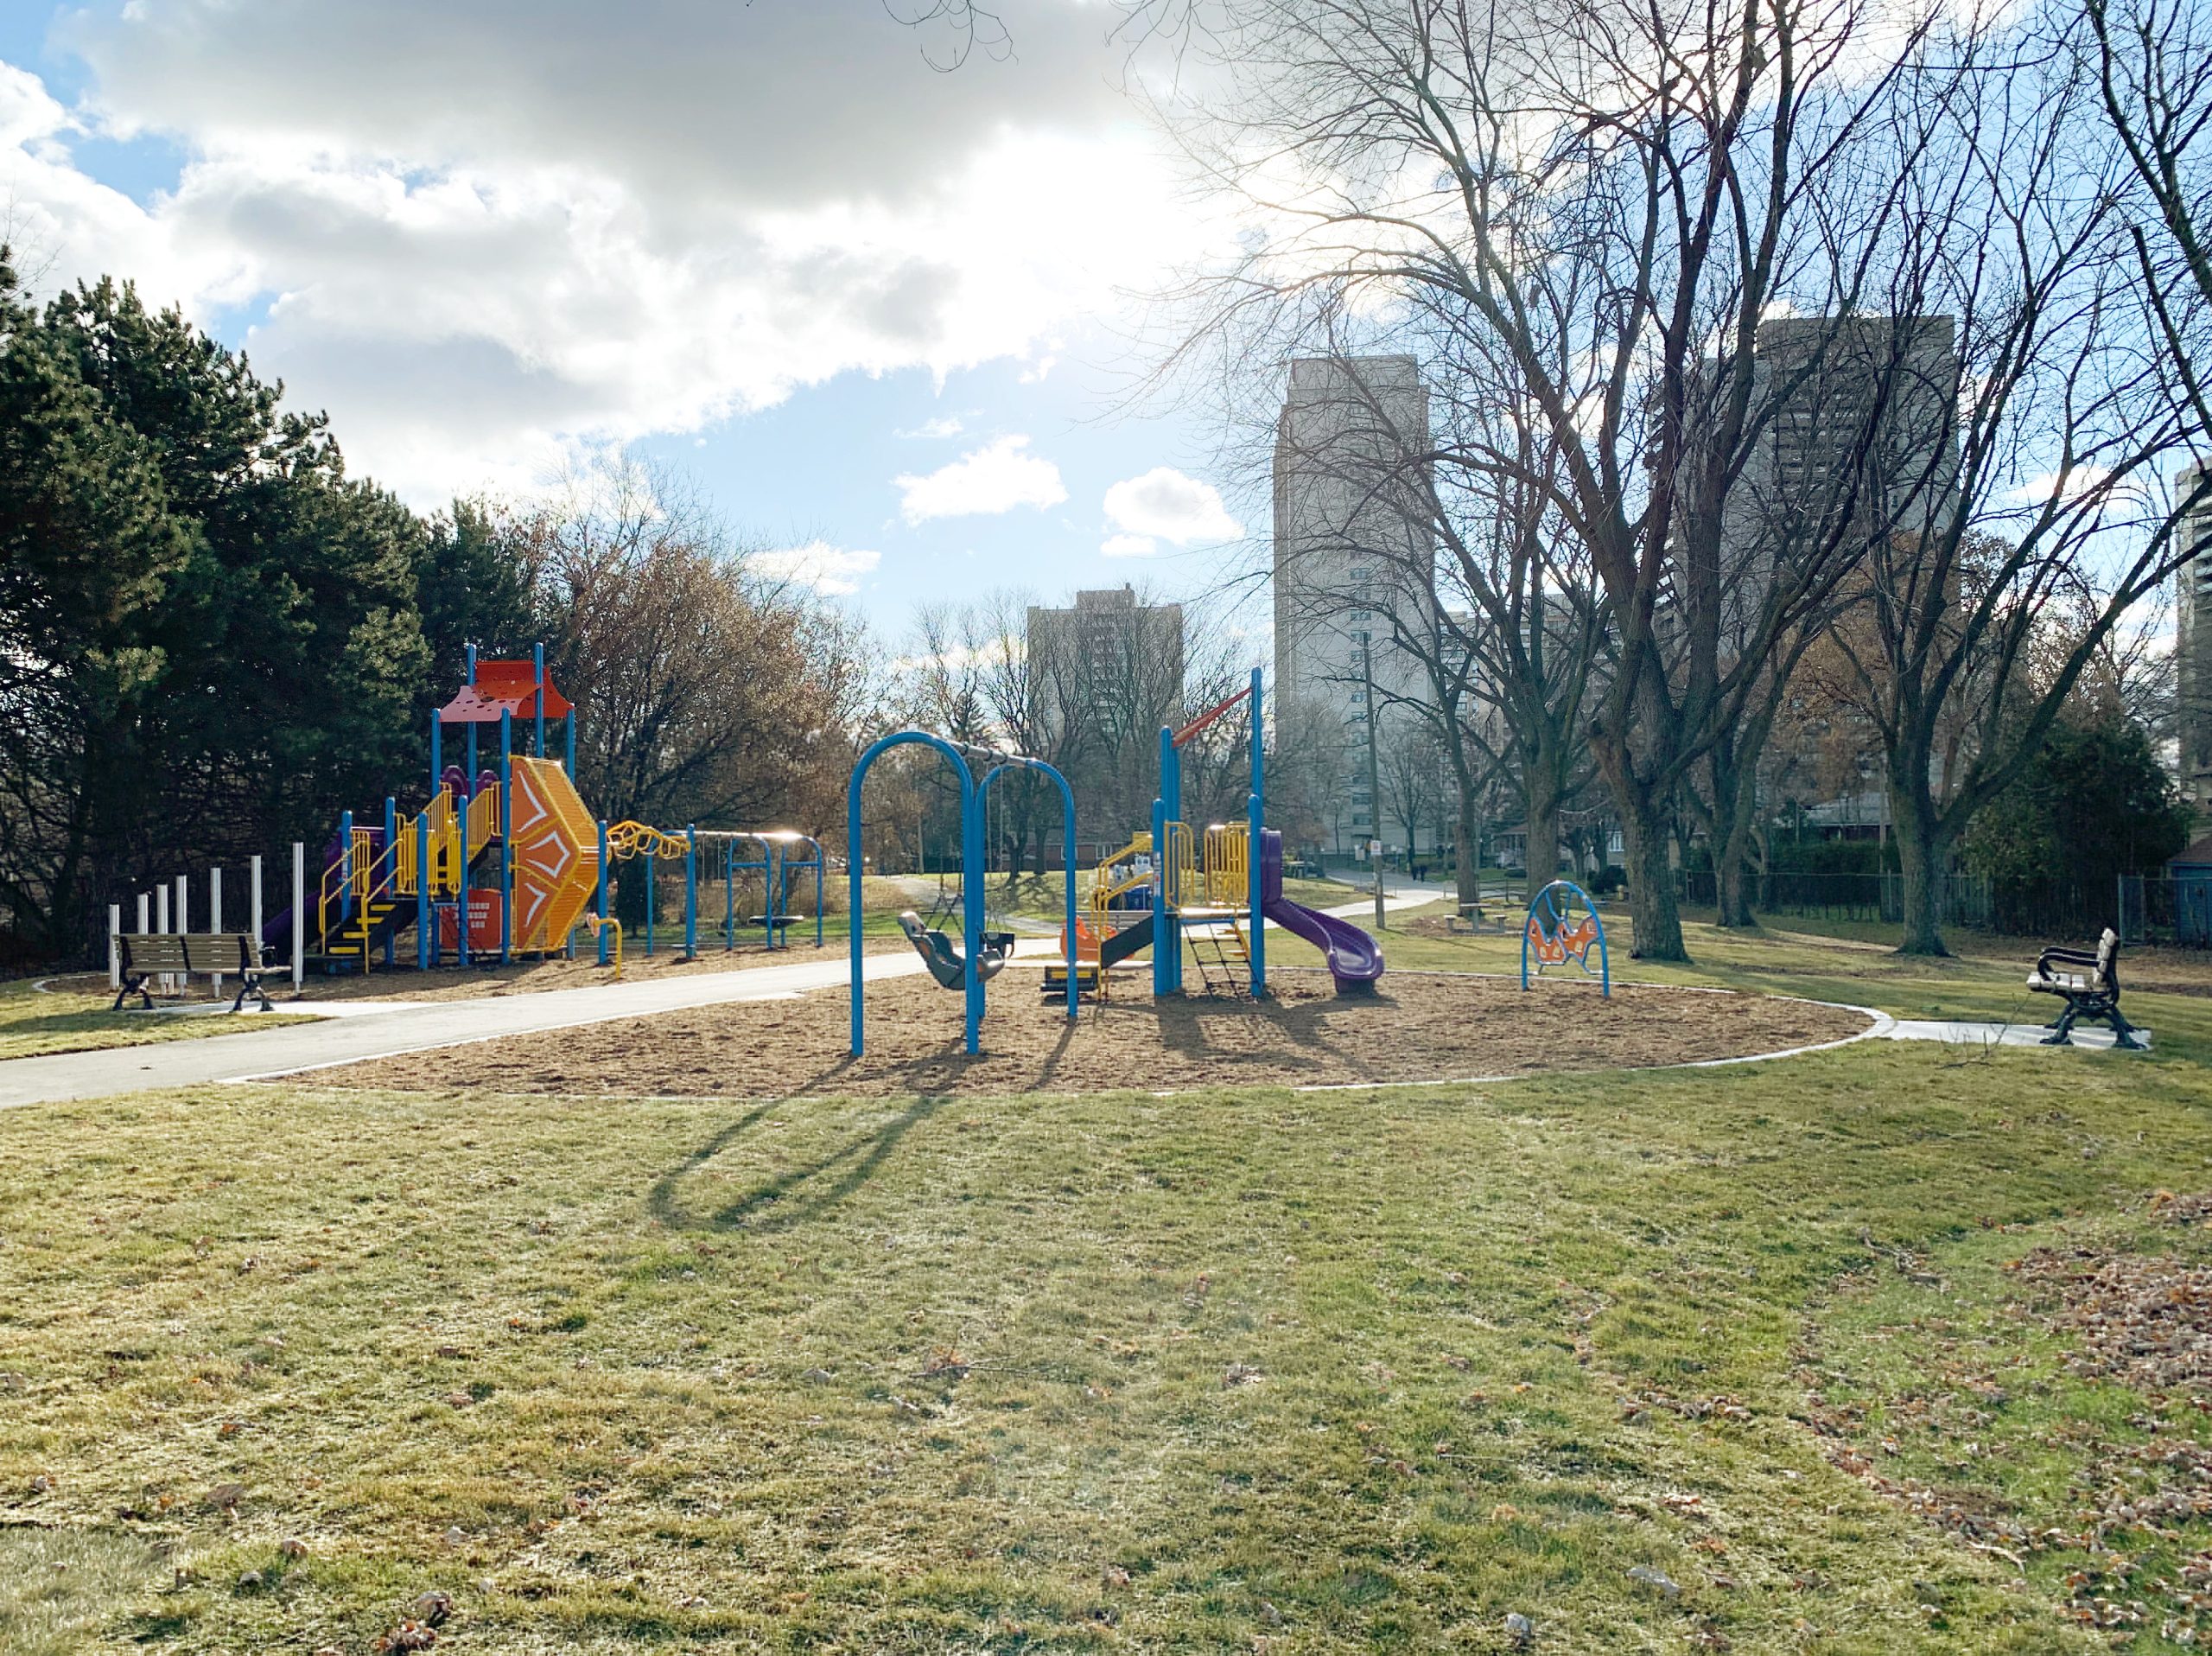 Benner Park Playground looking south. The playground is seperated into two areas by the central walkway; the senior play area is to the east of the walkway and the junior play area is to the west of the walkway. There is a mature tree in the foreground with more mature trees to the west and east behind both areas of the playground.